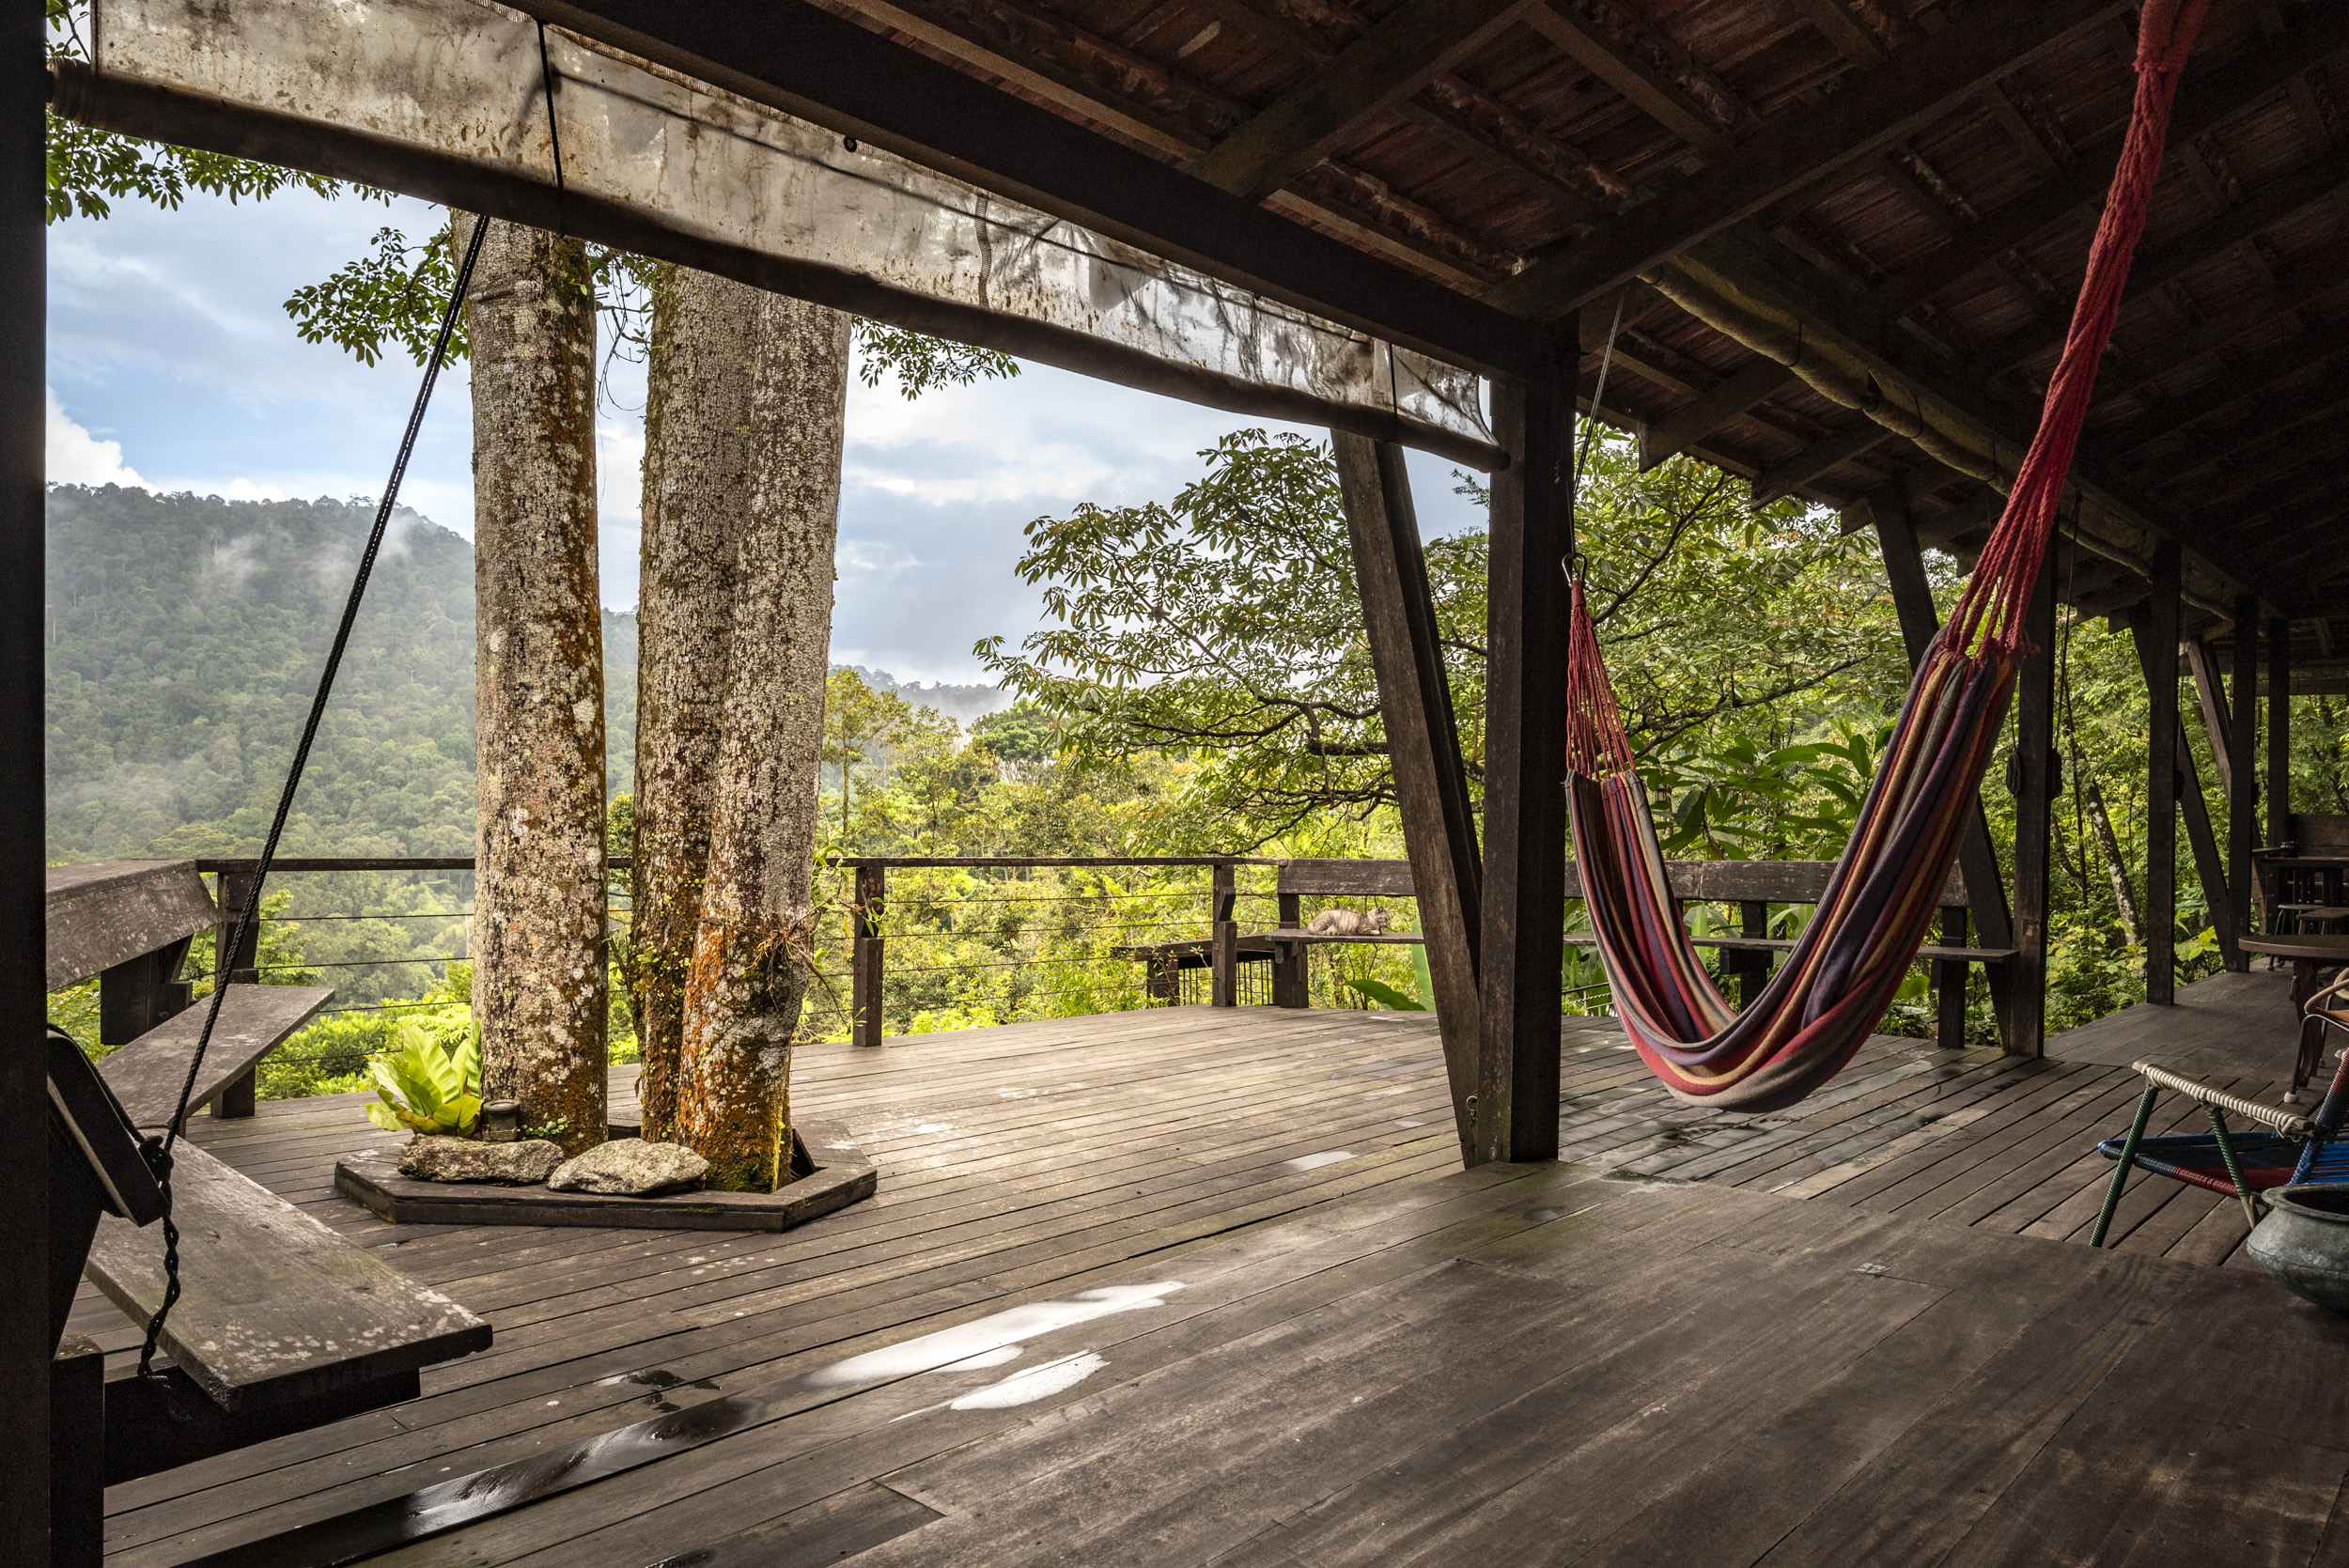 A view of Spyder Hill main deck with a hammock to chill. Behind it is the Berembun Forest Reserve.